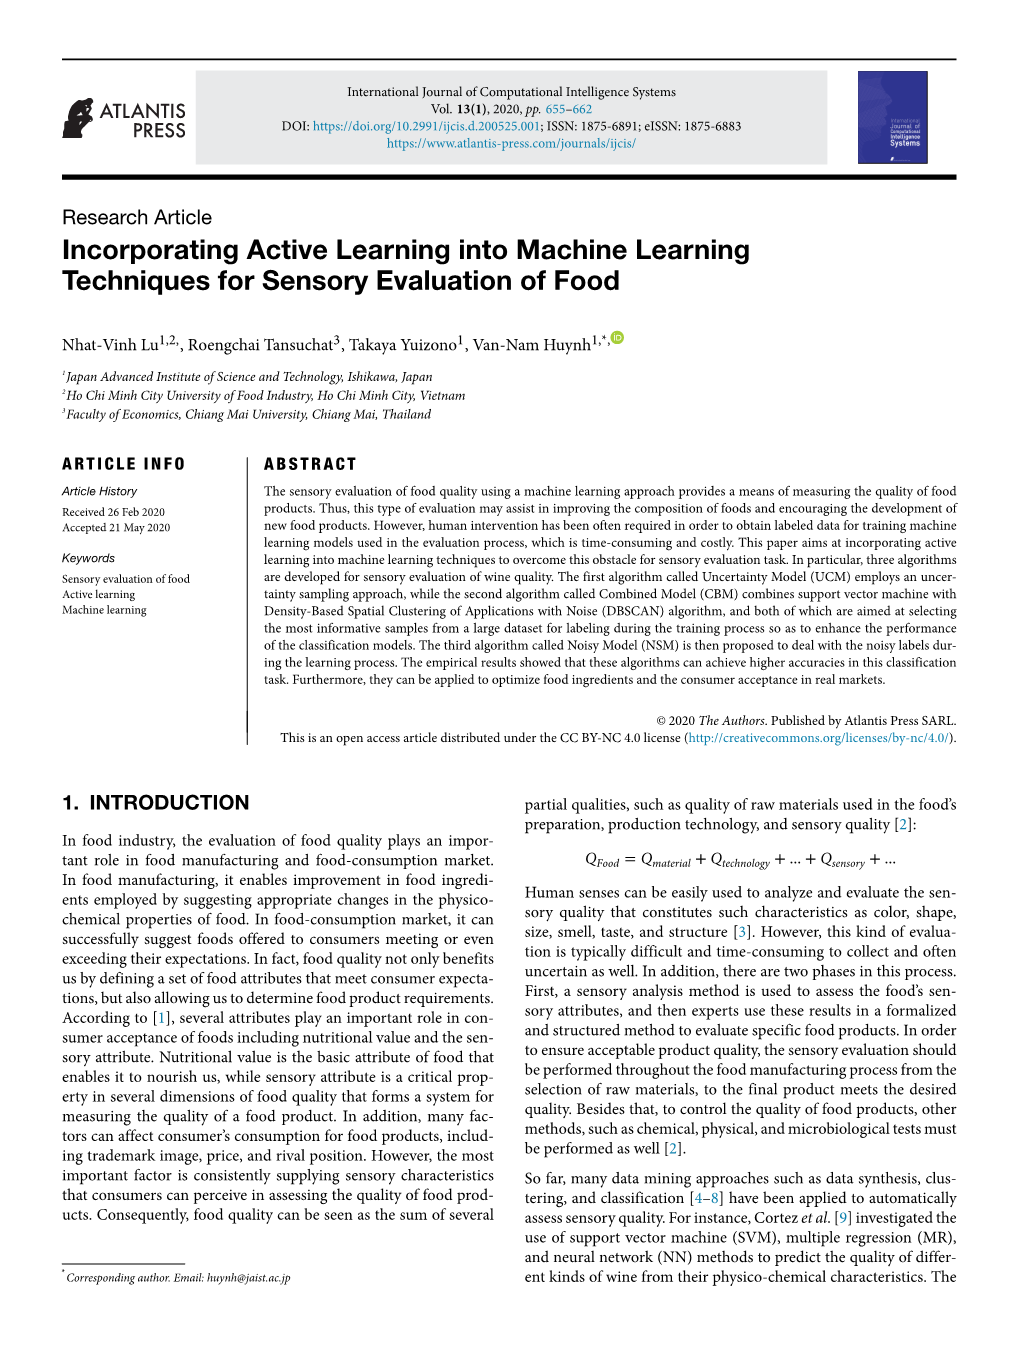 Incorporating Active Learning Into Machine Learning Techniques for Sensory Evaluation of Food